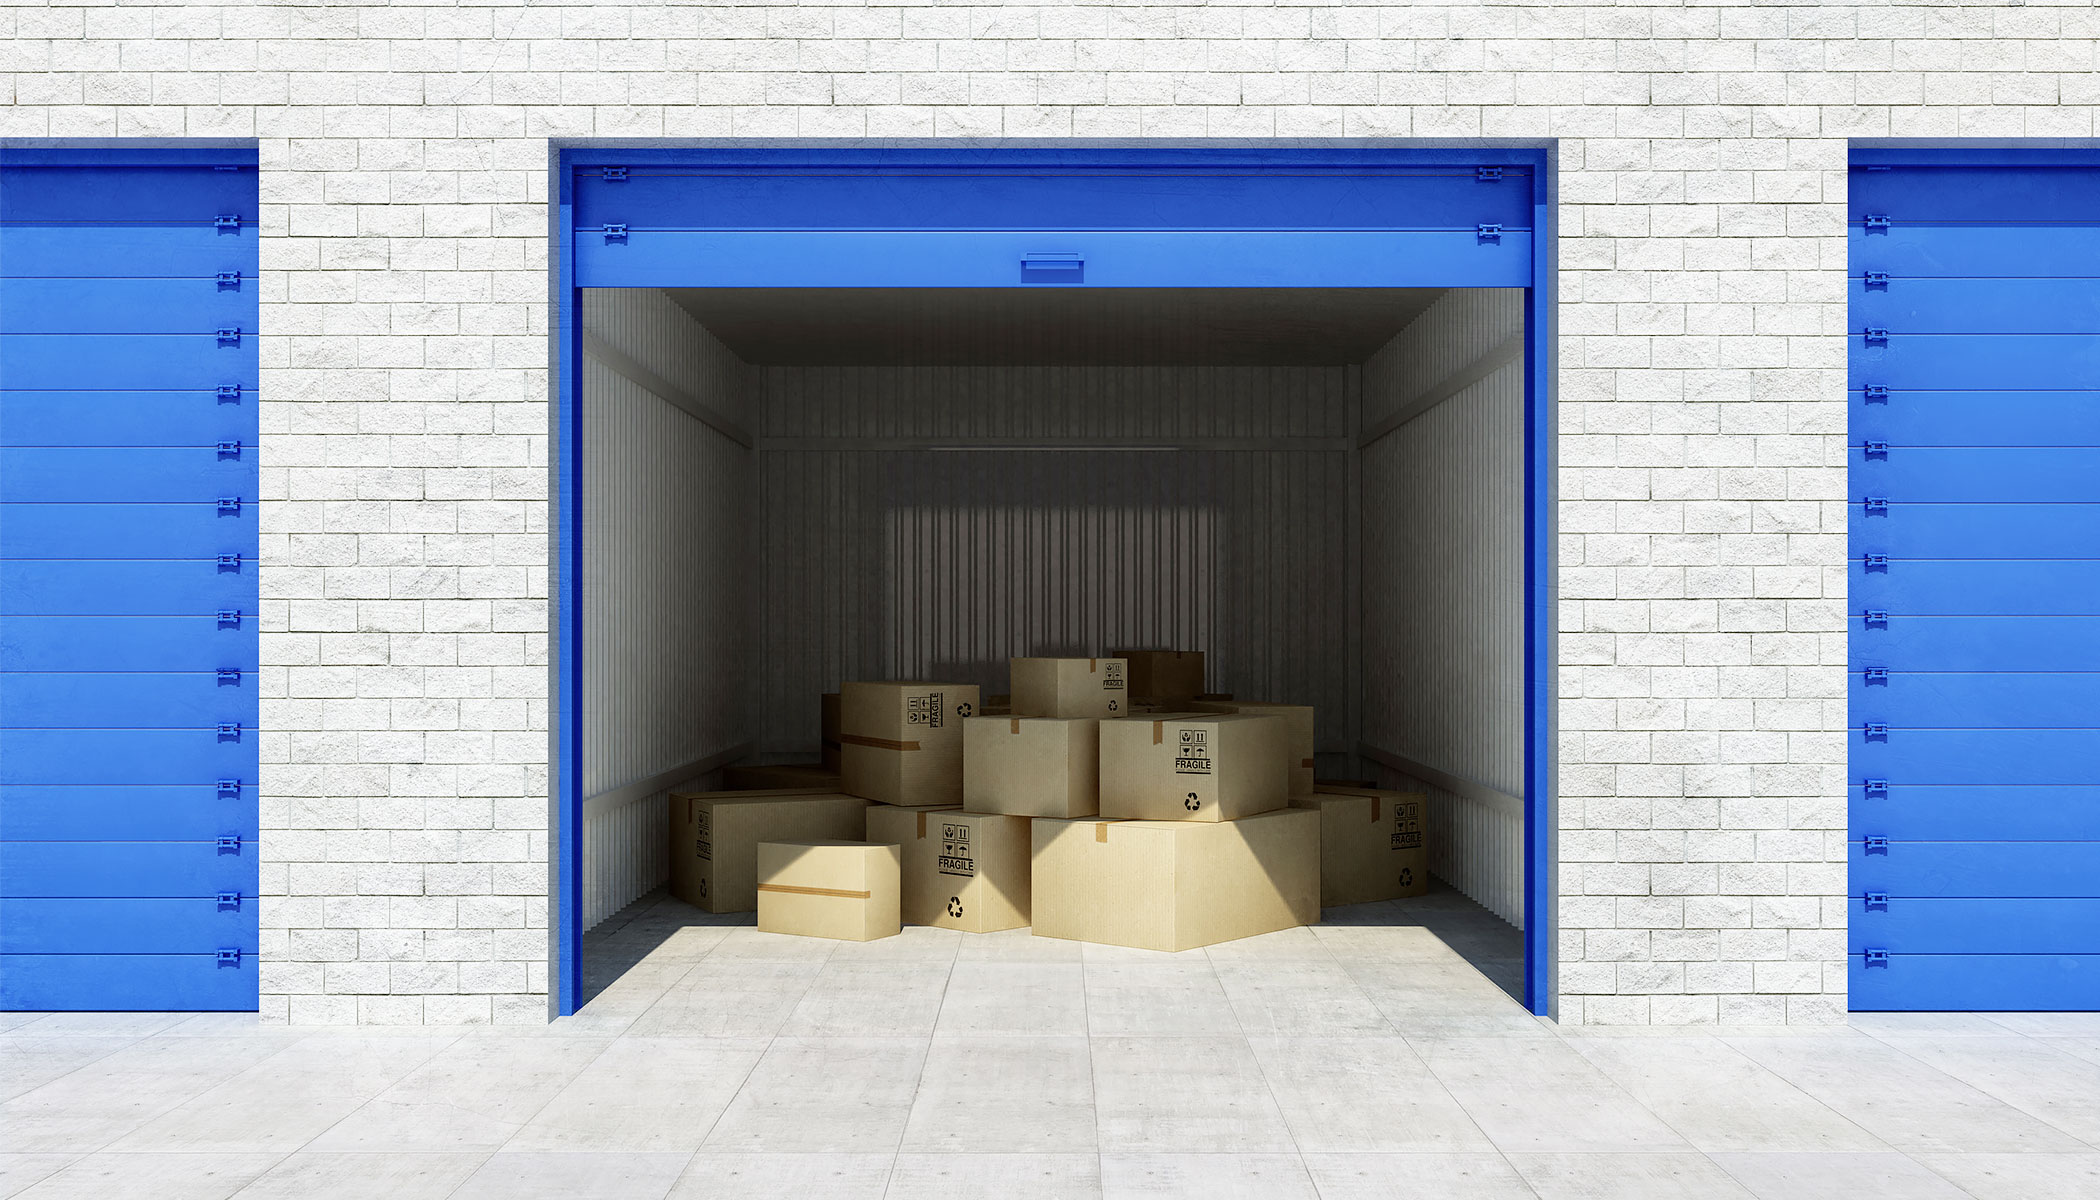 How to Keep Mice and Bugs Out of a Storage Unit - Life Storage Blog